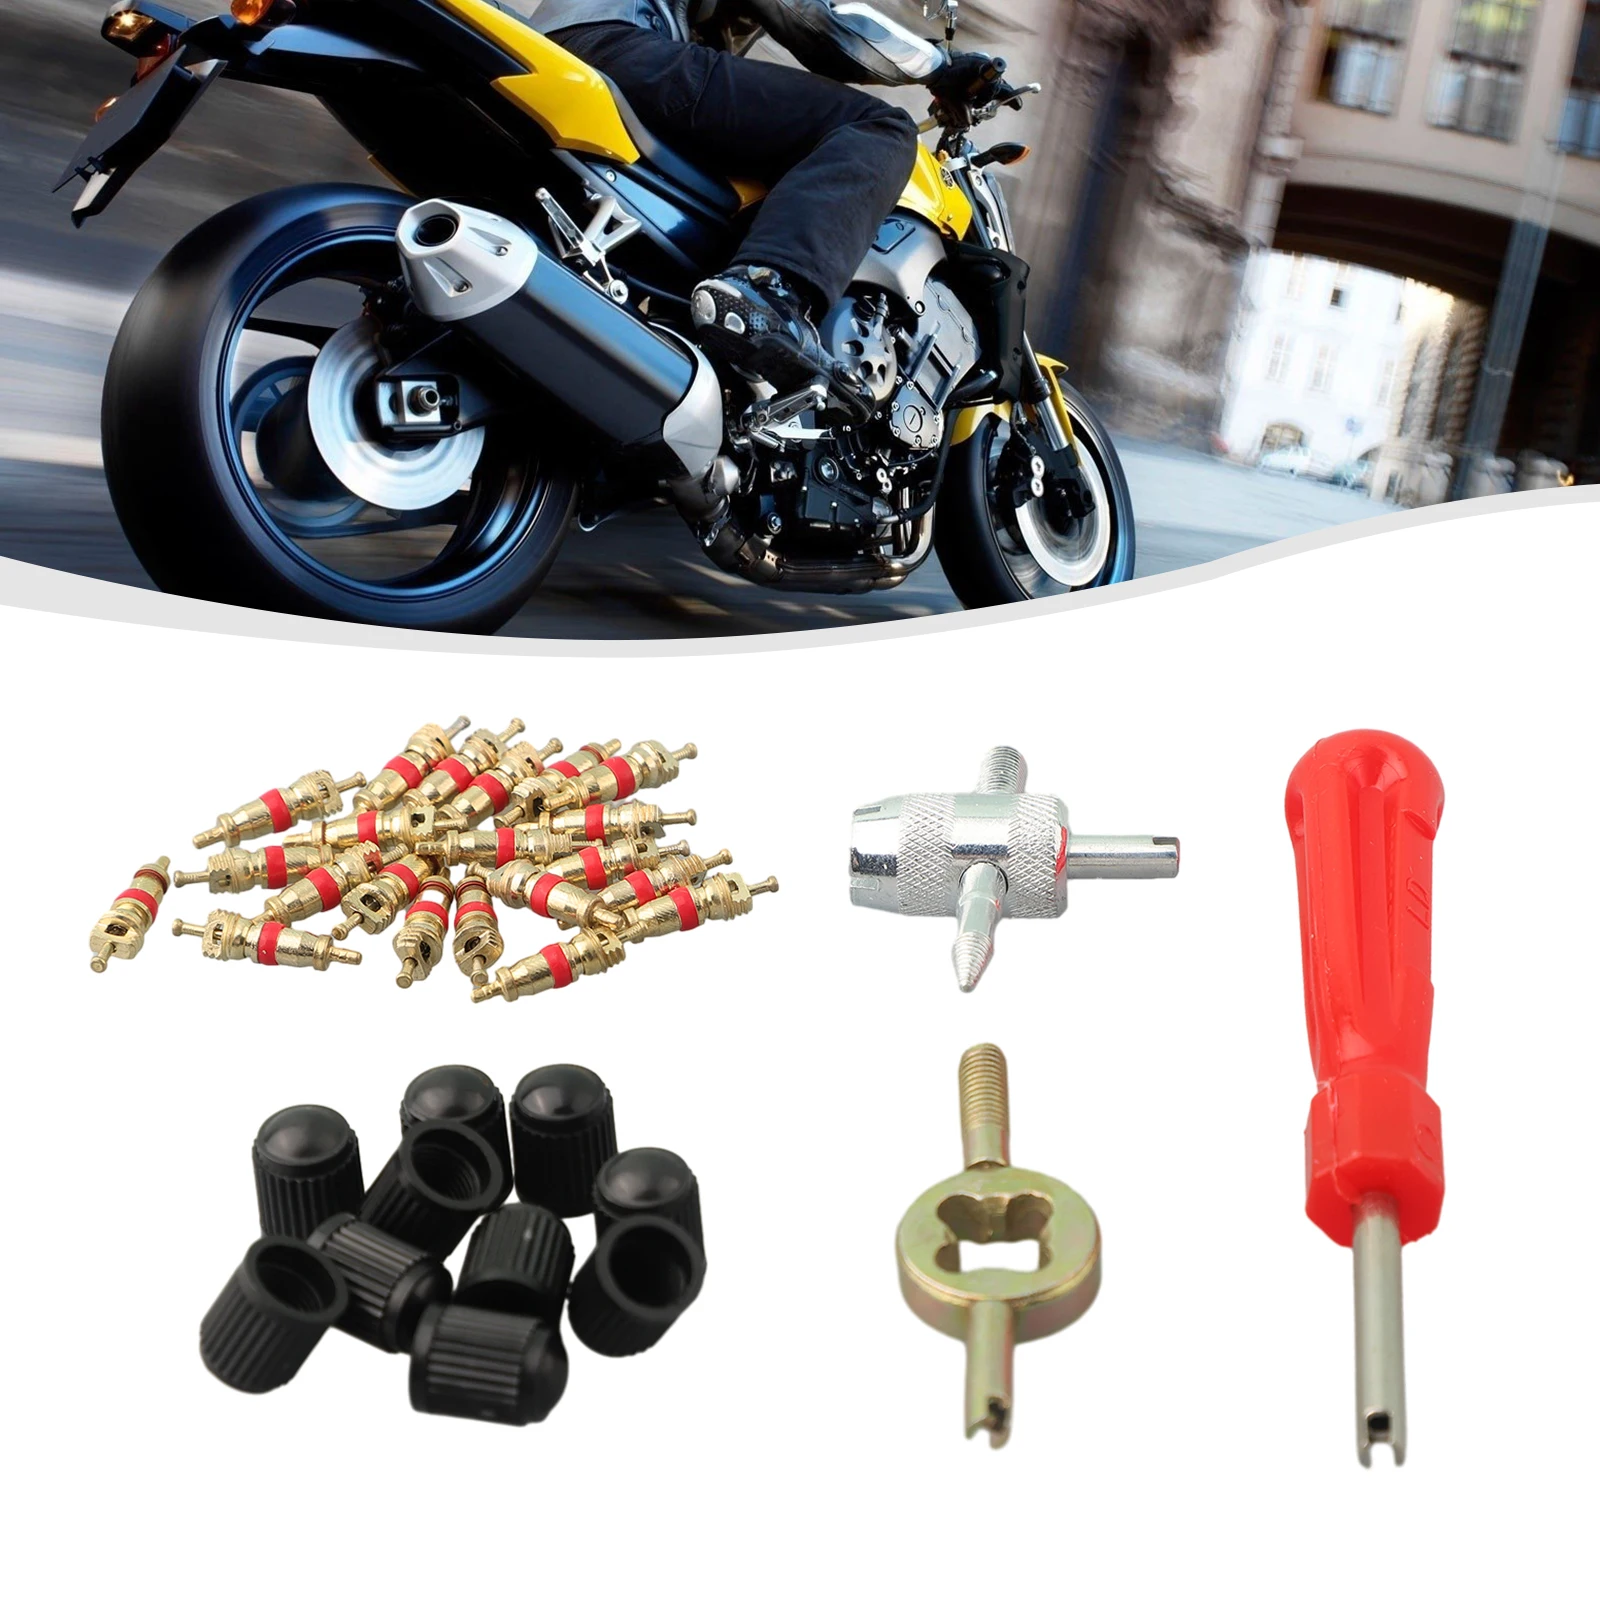 

Cars Motorcycles Tire Repair Tool Repair Install Tool Removal Installation Tire Valve Stem Core Remover Tyre Inserts None